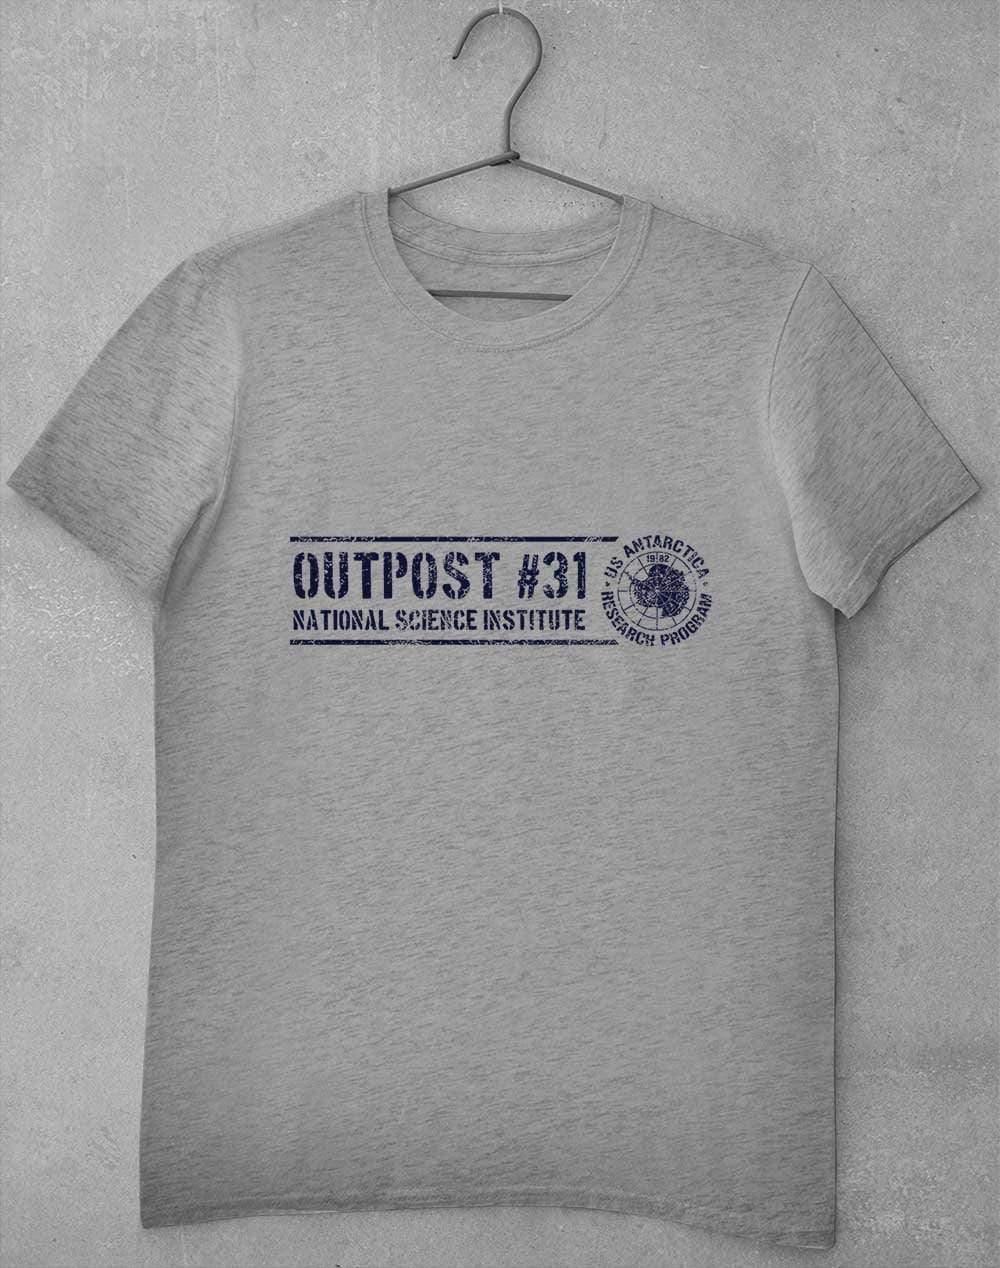 Outpost 31 Antarctica T-Shirt S / Heather Grey  - Off World Tees